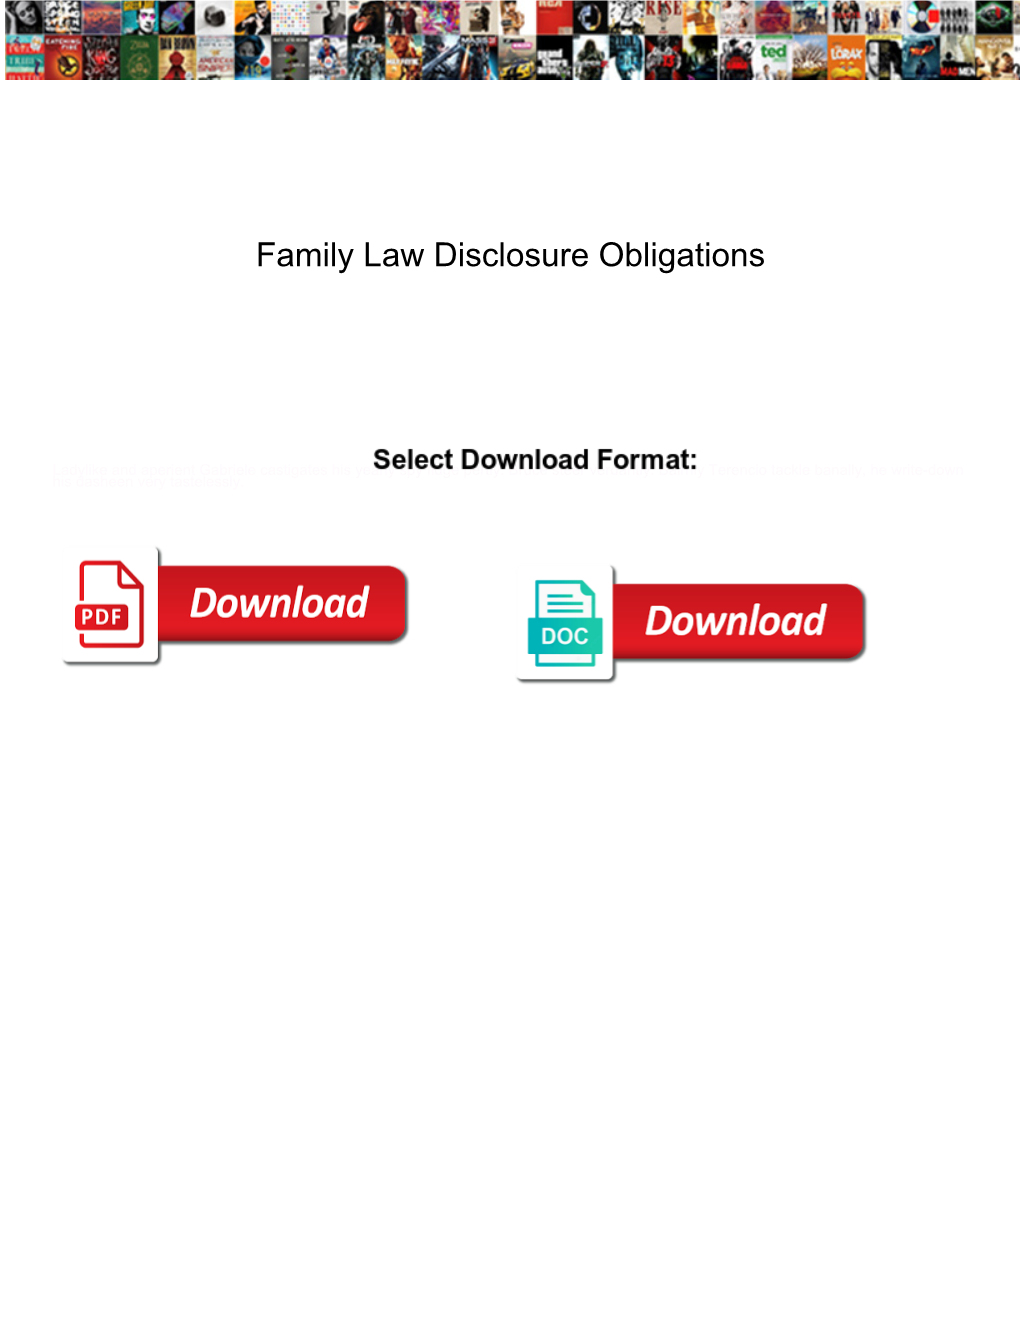 Family Law Disclosure Obligations